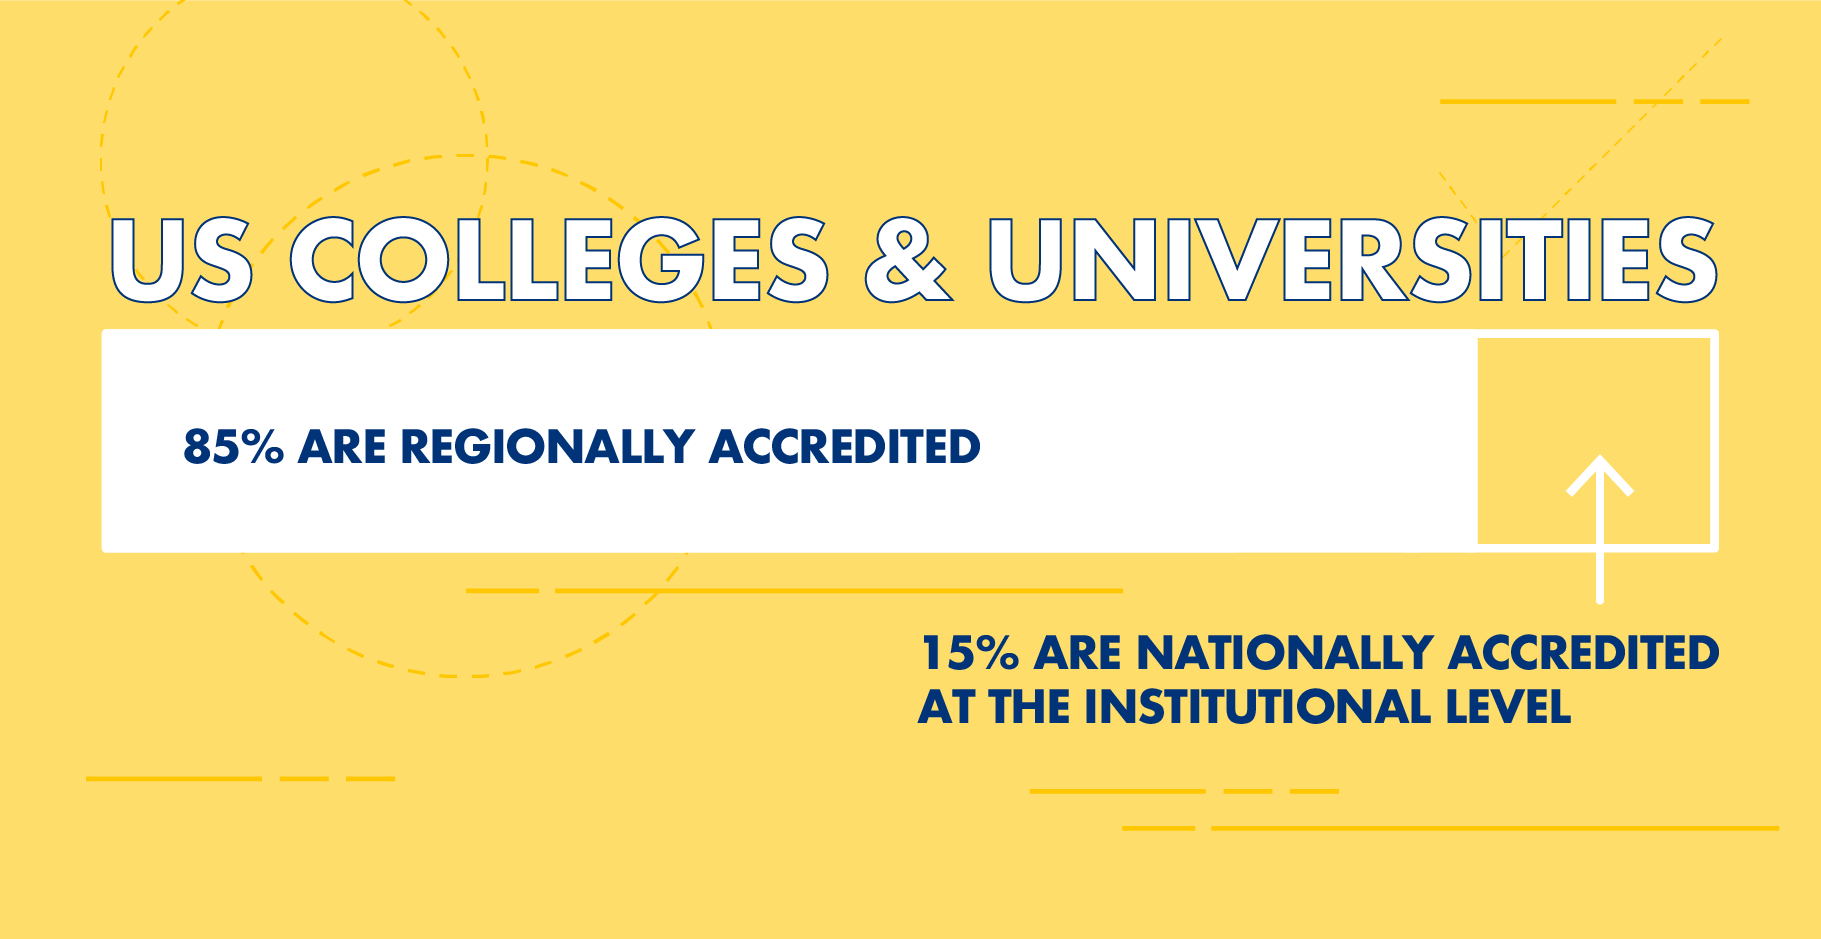 85% of US colleges and universities are regionally accredited